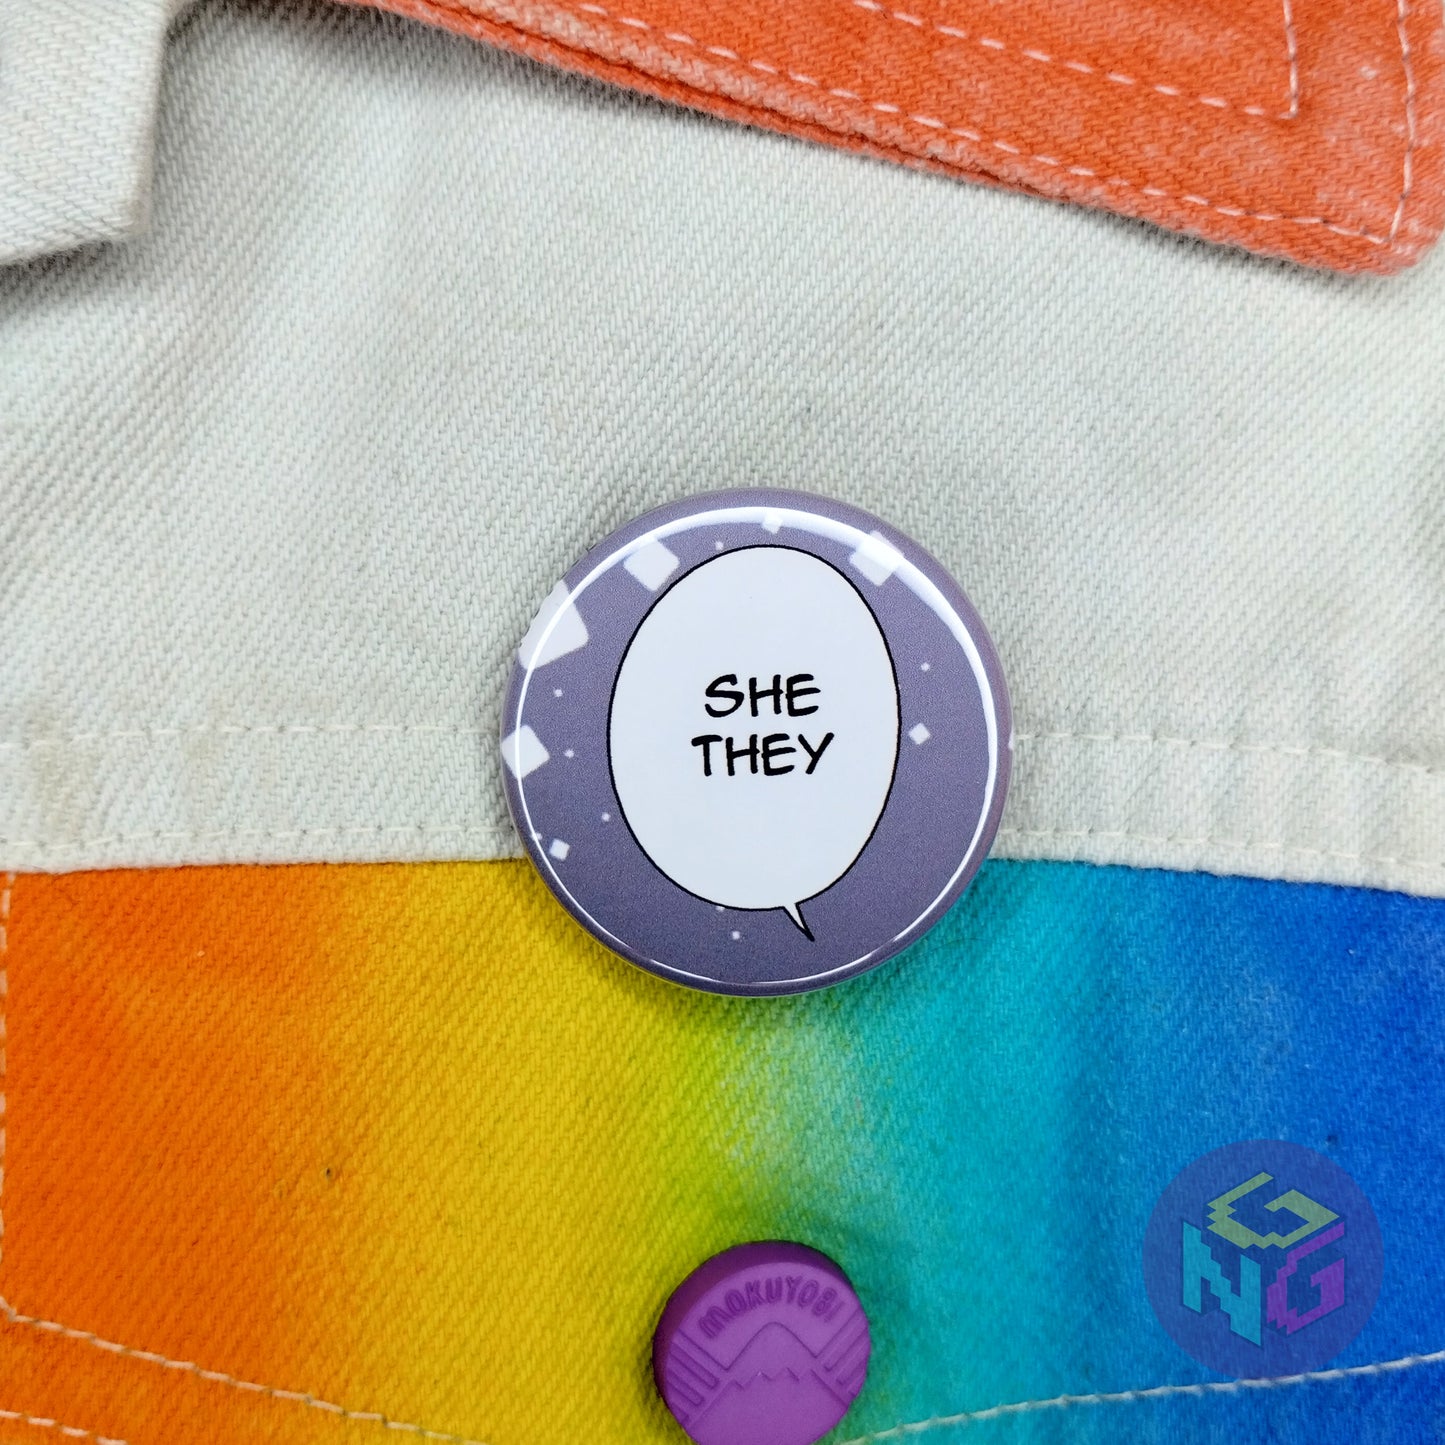 round she they comic panel pronoun button pinned to a white denim jacket with rainbow details